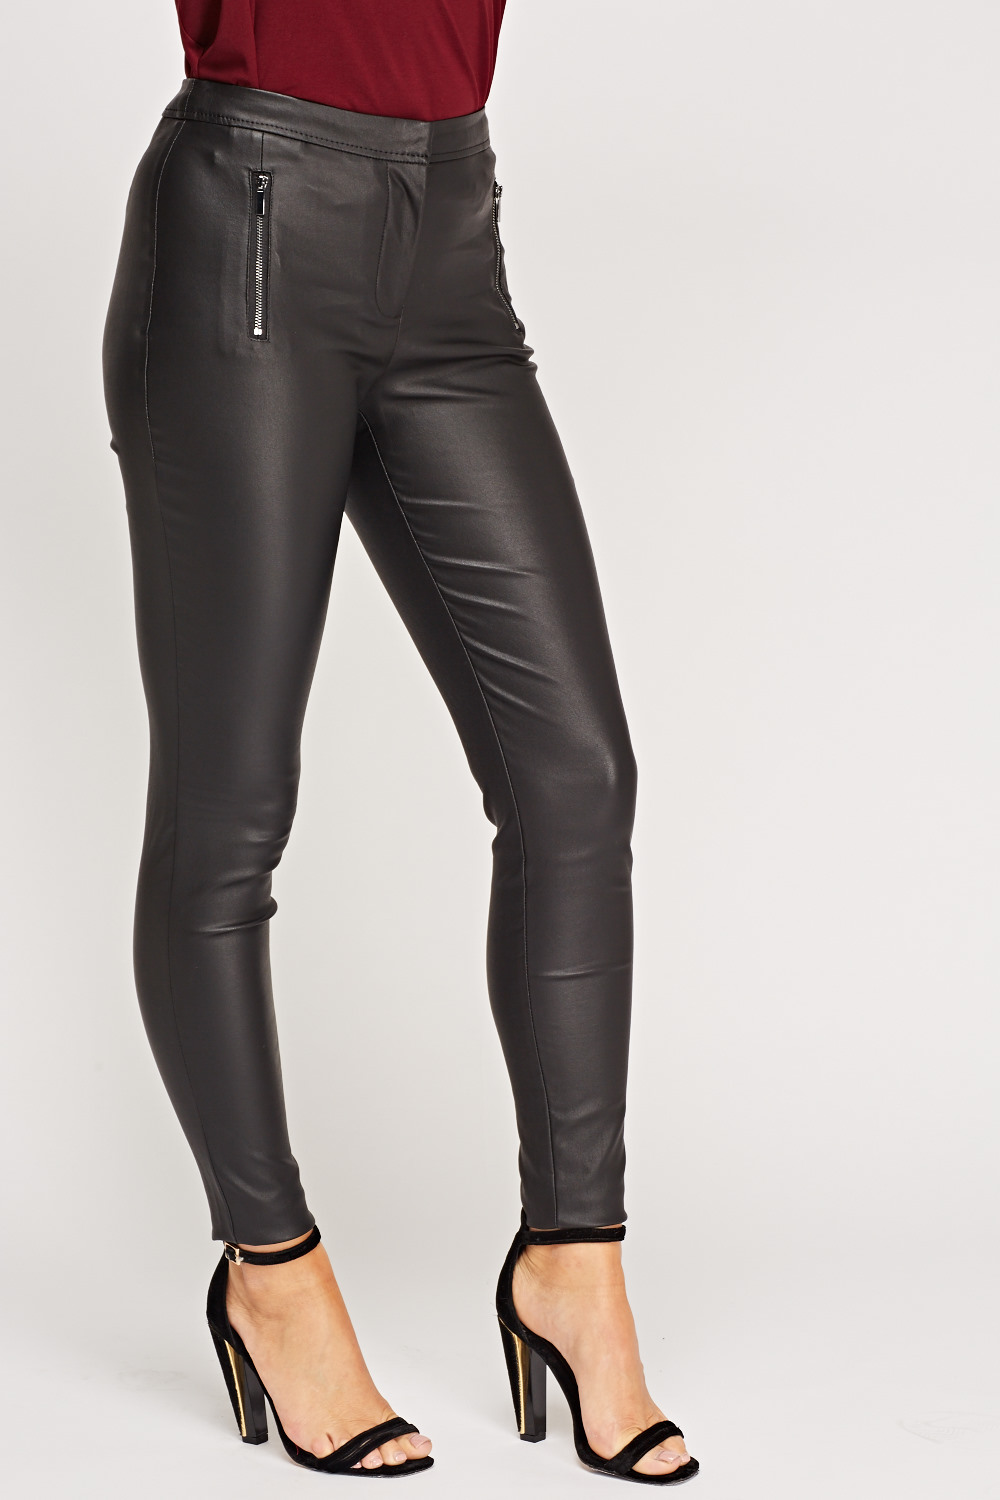 Black Faux Leather Trousers - Just $7